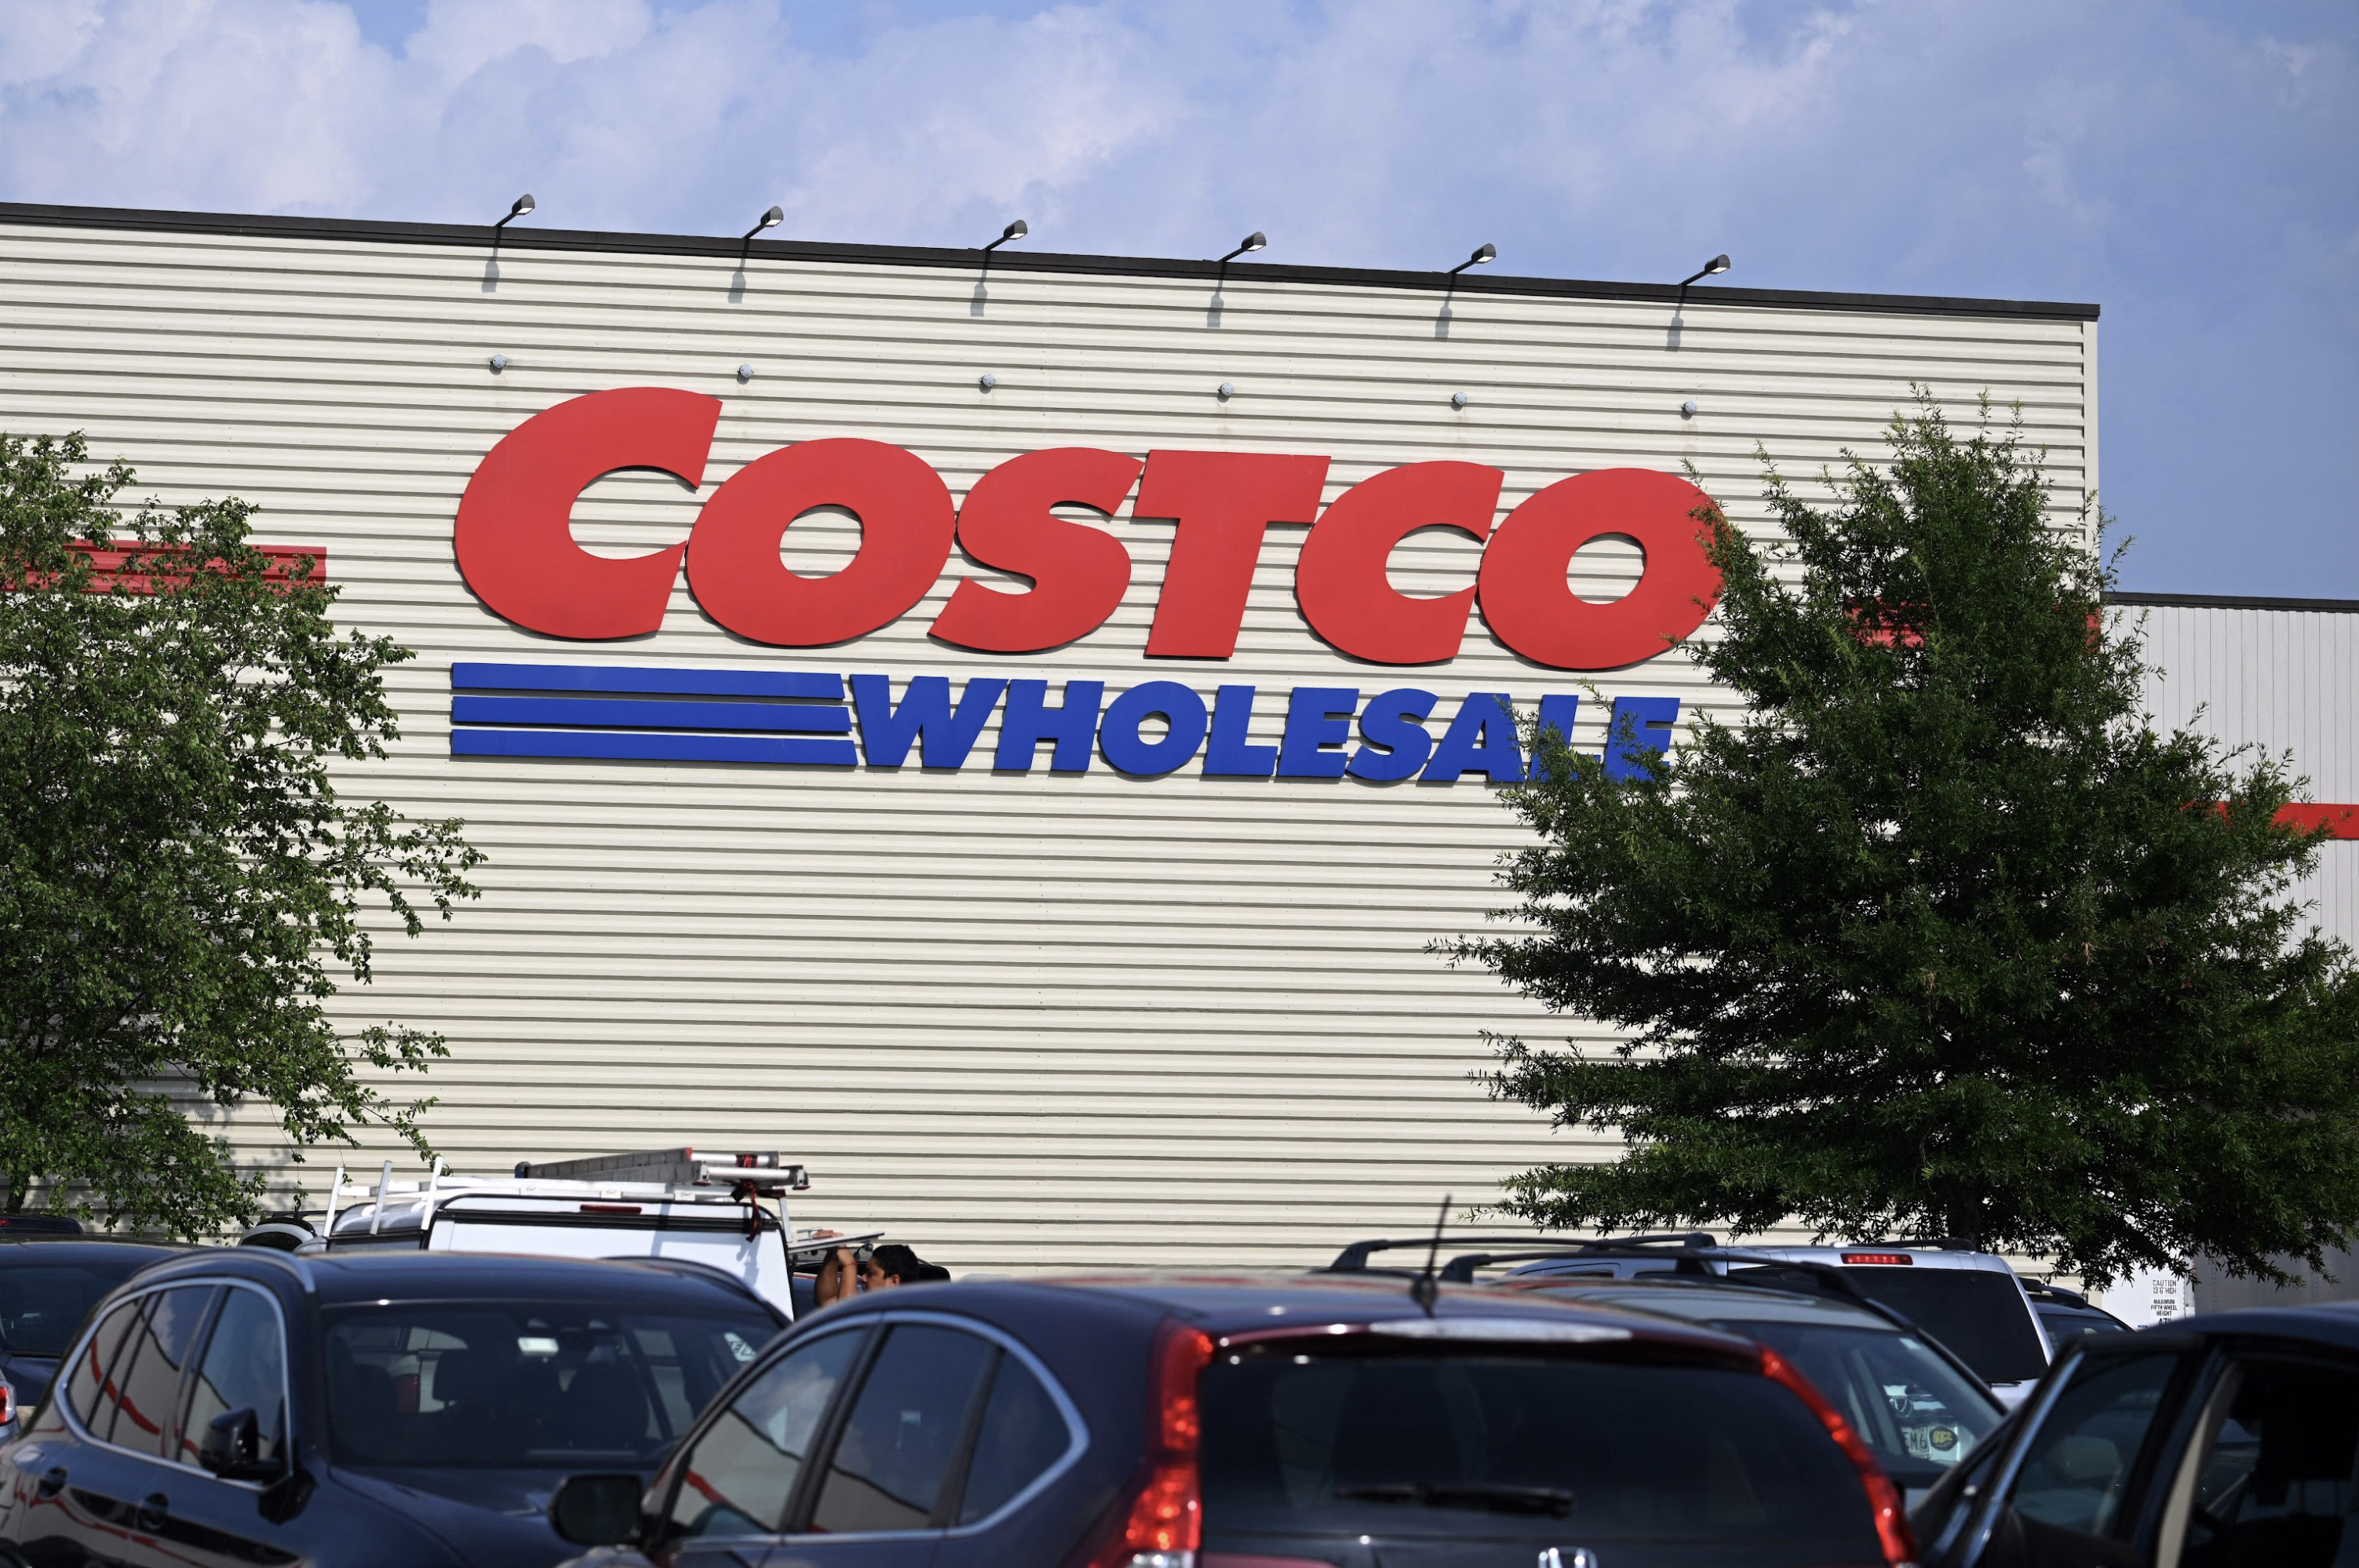 If You'd Invested $1,000 in Costco Stock 5 Years Ago, Here's How Much You'd Have Today